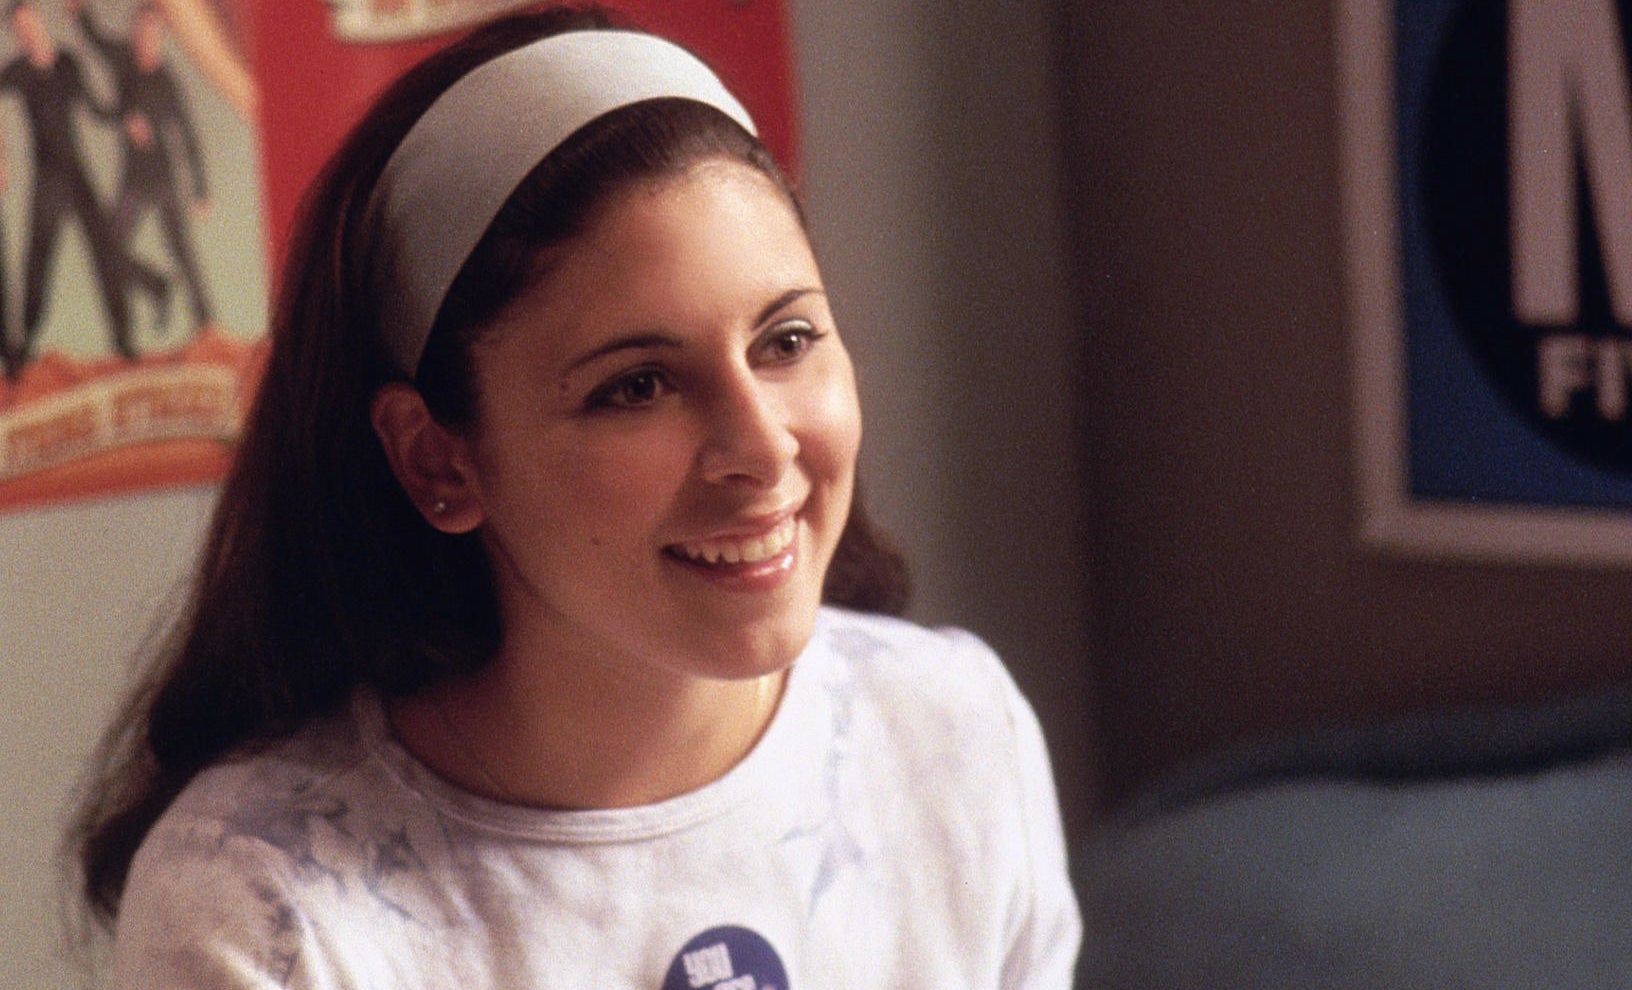 Meadow wearing a headband and smiling